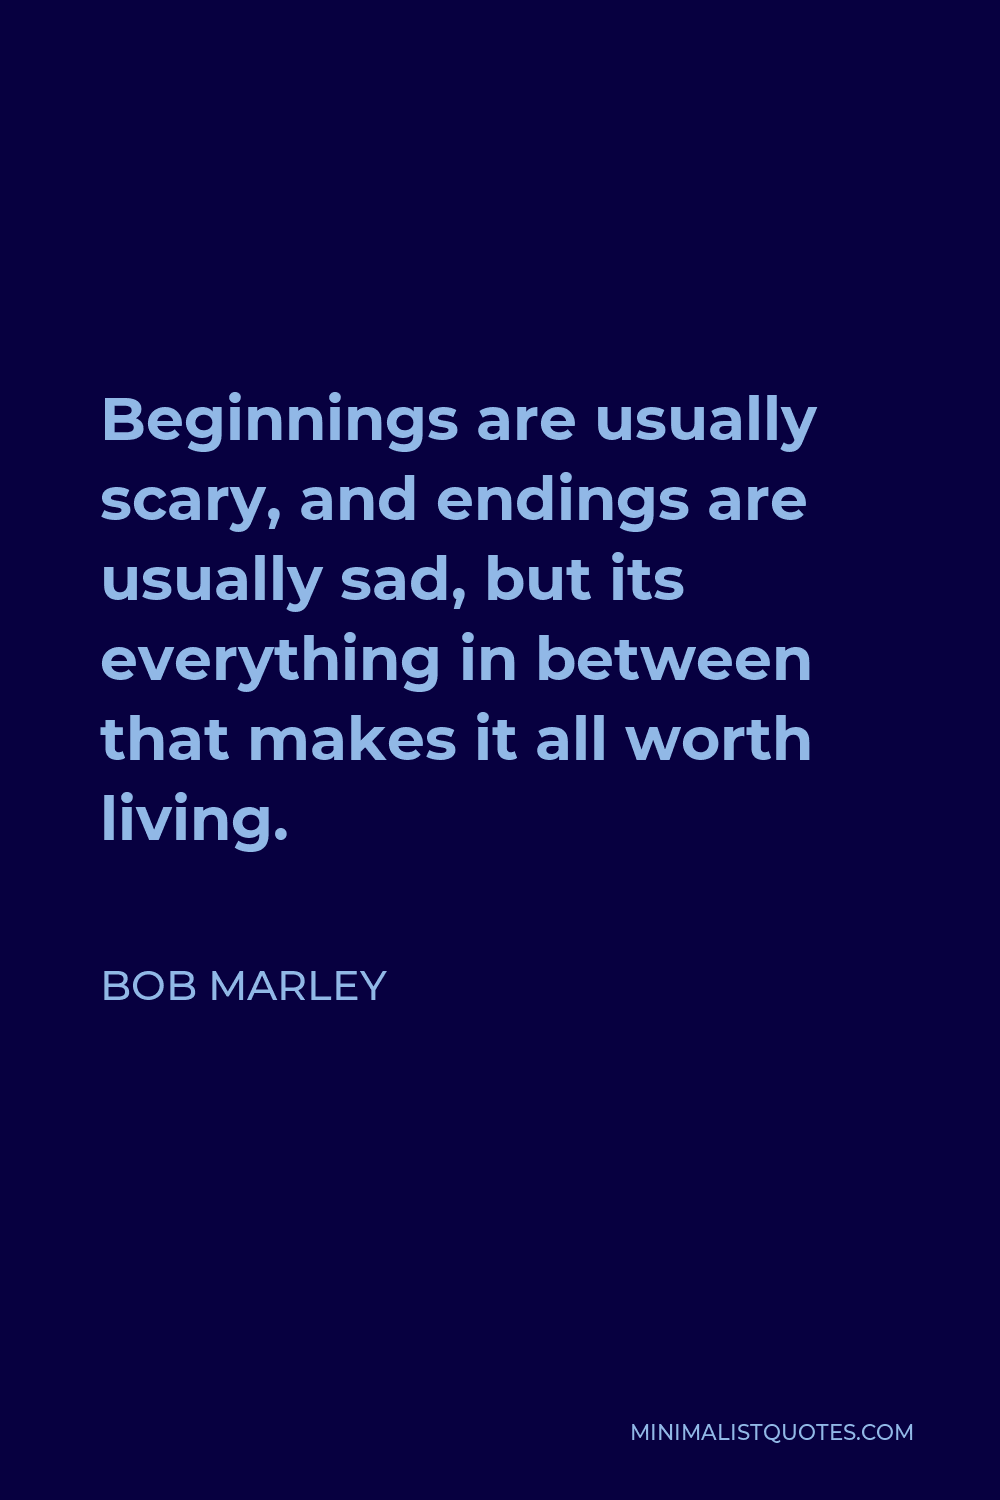 Bob Marley Quote - Beginnings are usually scary, and endings are usually sad, but its everything in between that makes it all worth living.